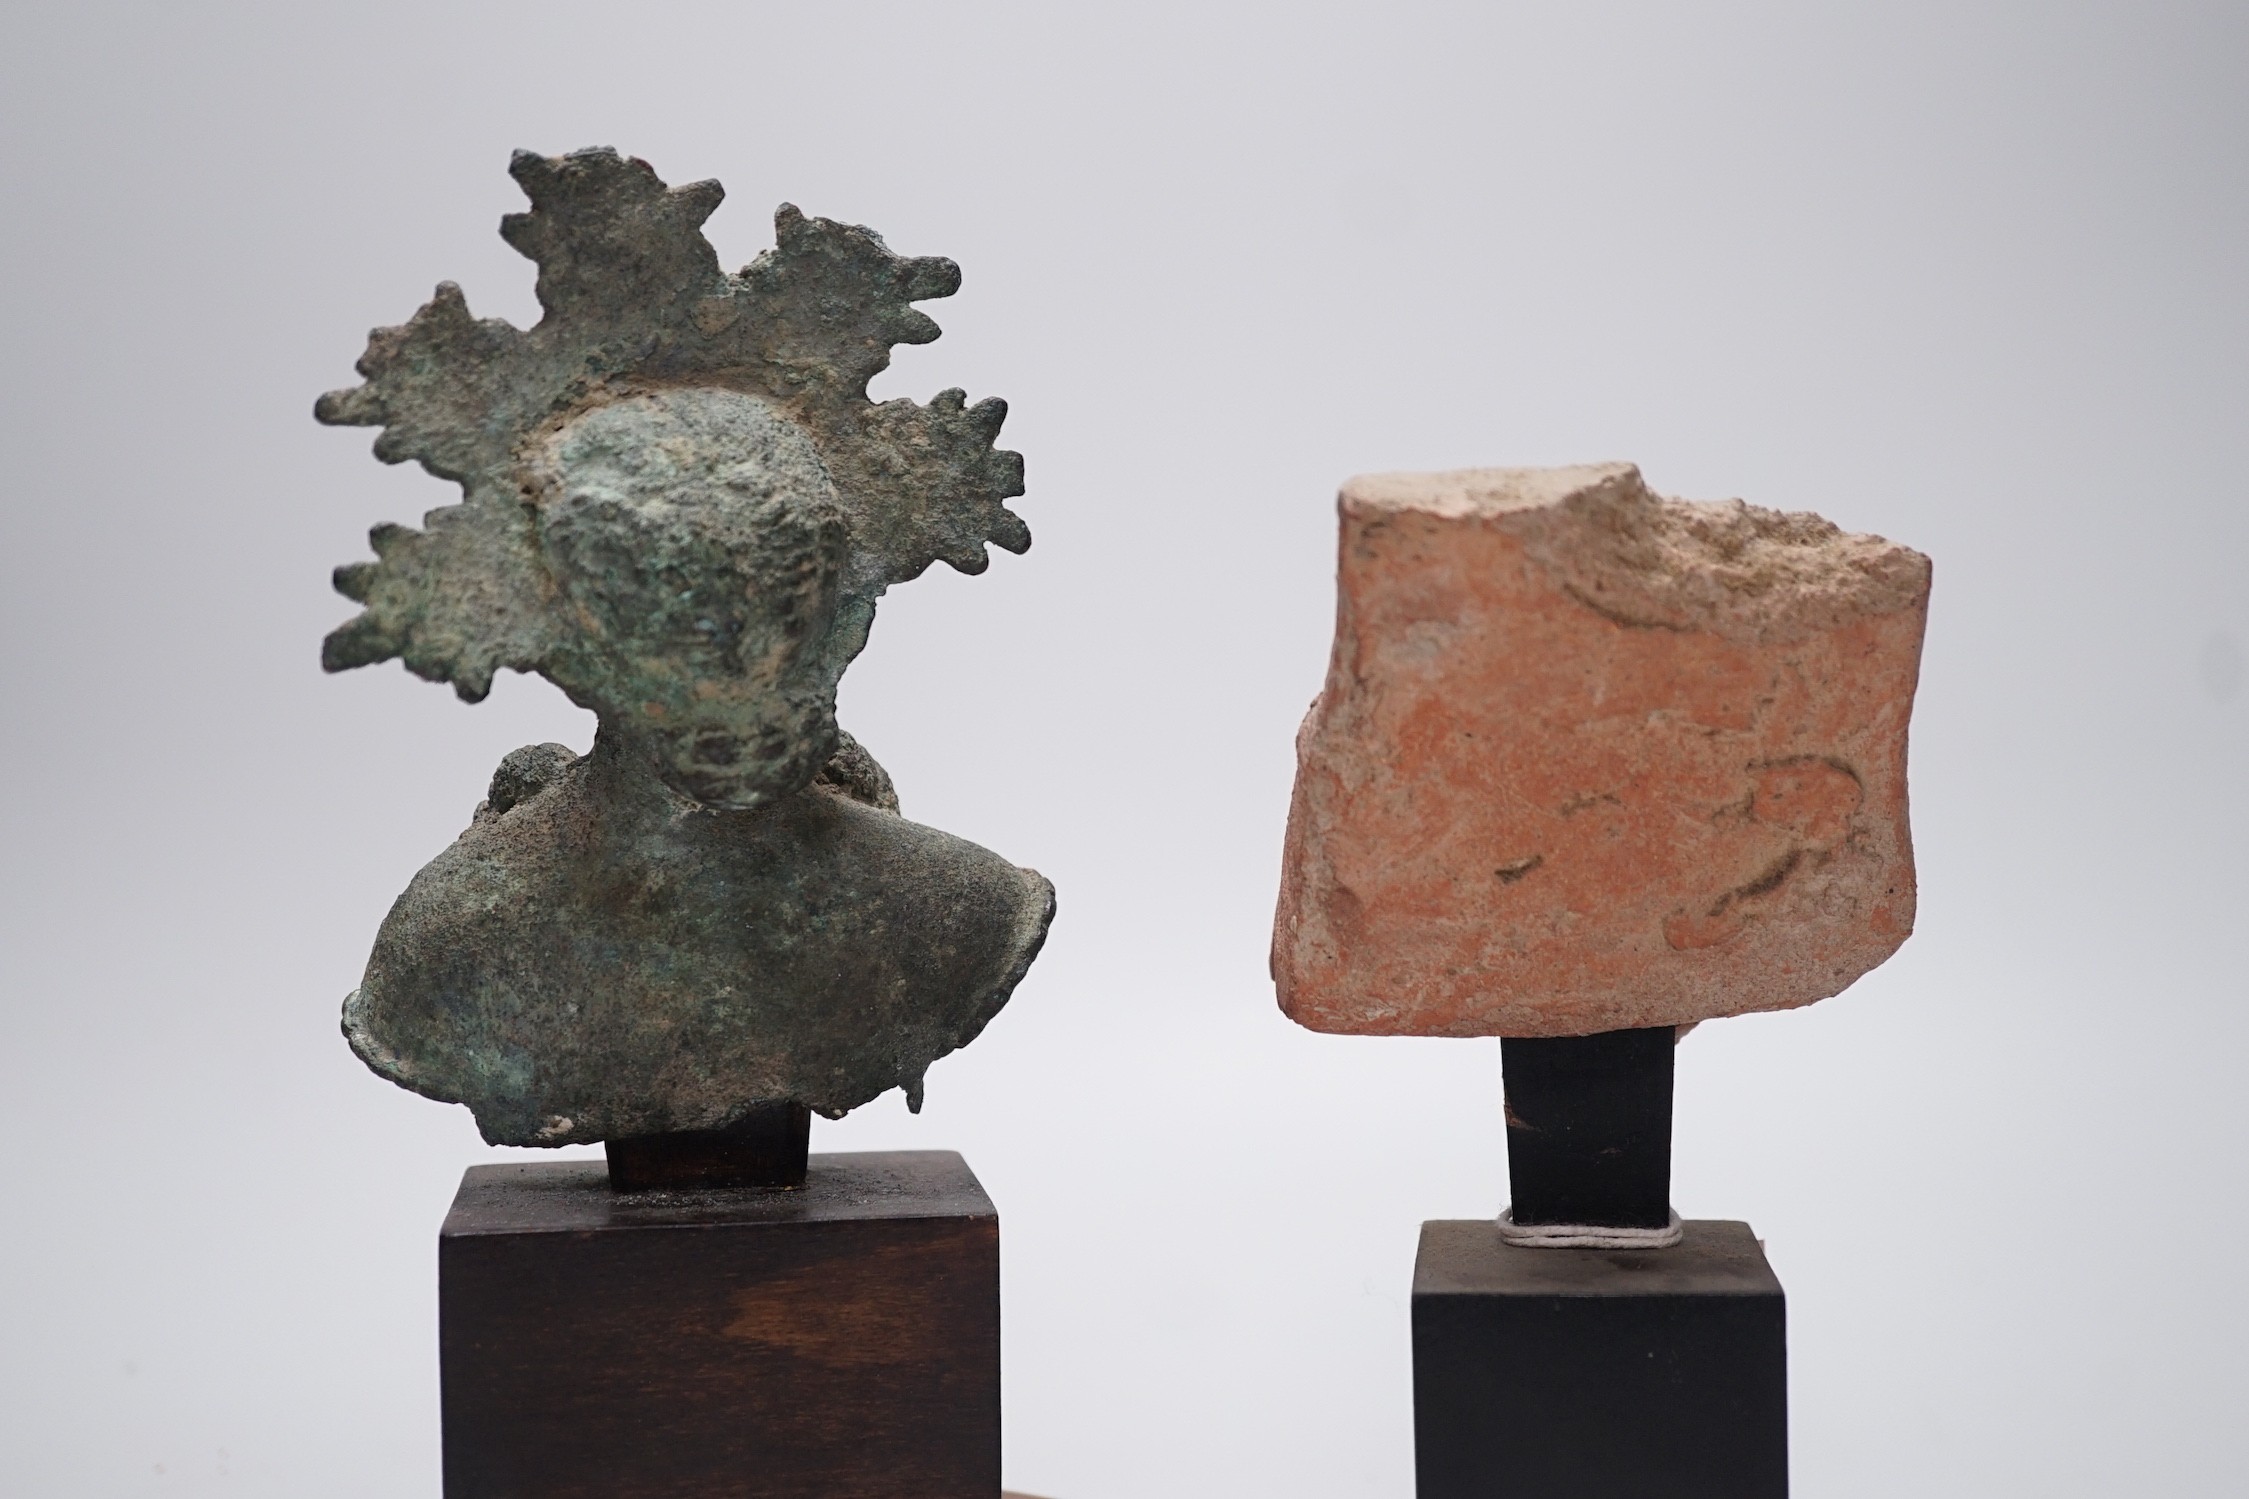 A Hellenistic terracotta brazier fragment with Dionysos mask, 2nd-1st century BCE., and a bronze fragment of a votive figure or figure of a goddess, probably Etruscan, 13.5 cm high excluding stand